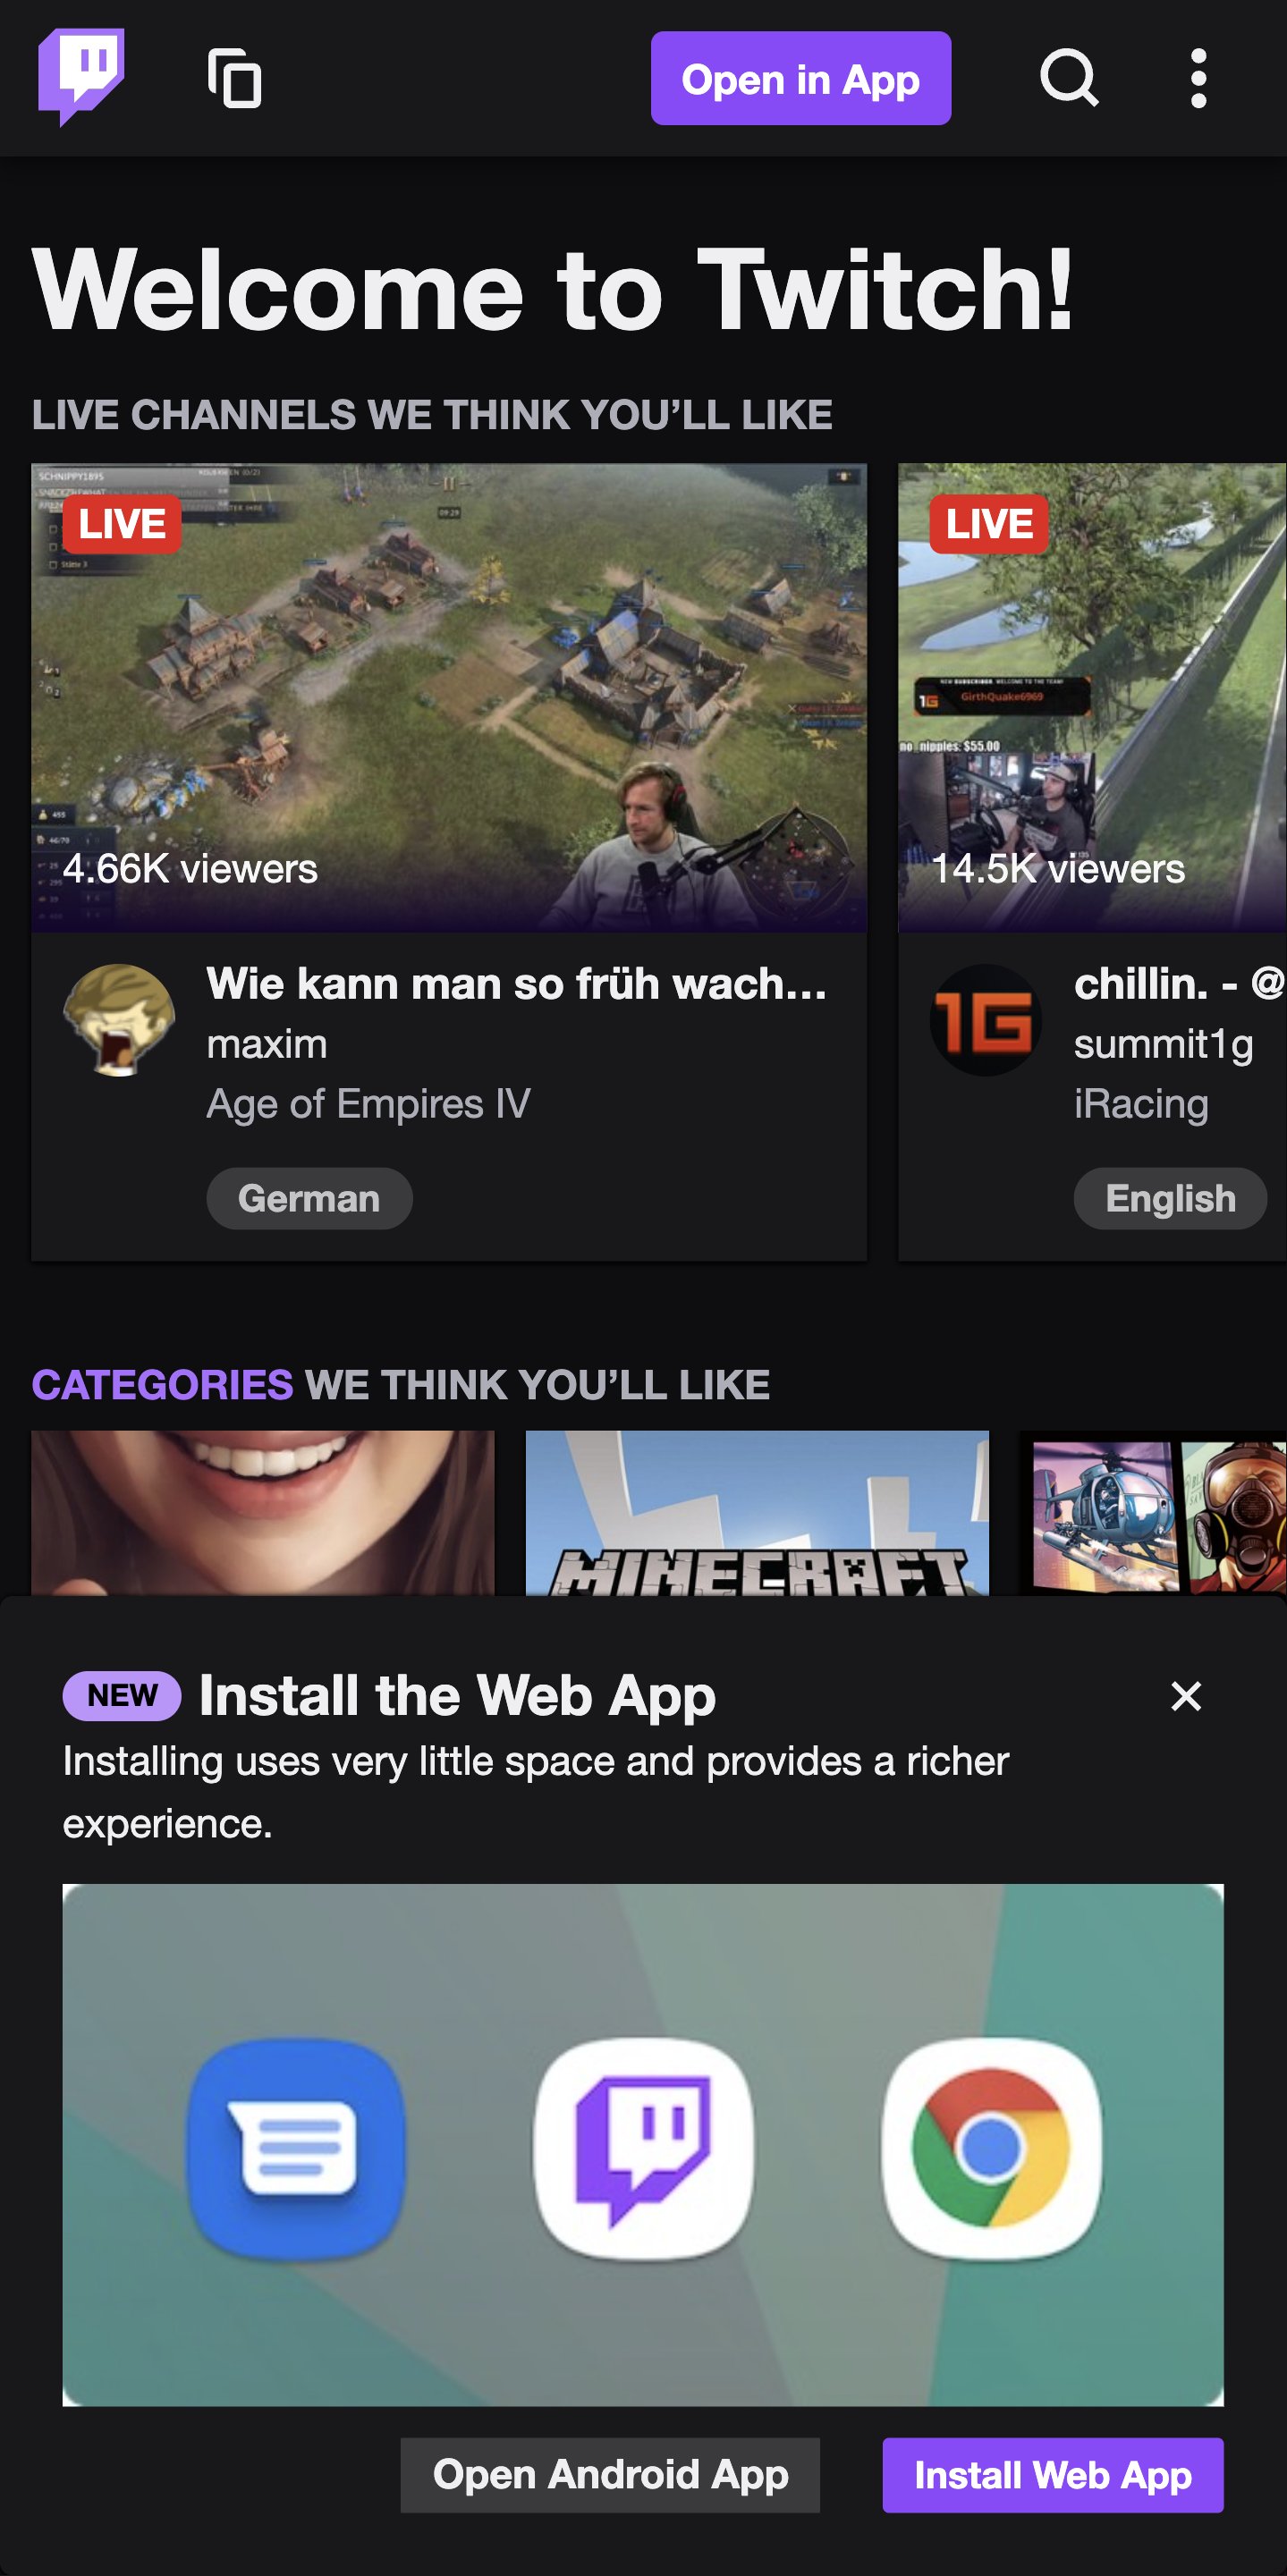 Thomas Steiner on X: Wow, @Twitch has started to position its PWA